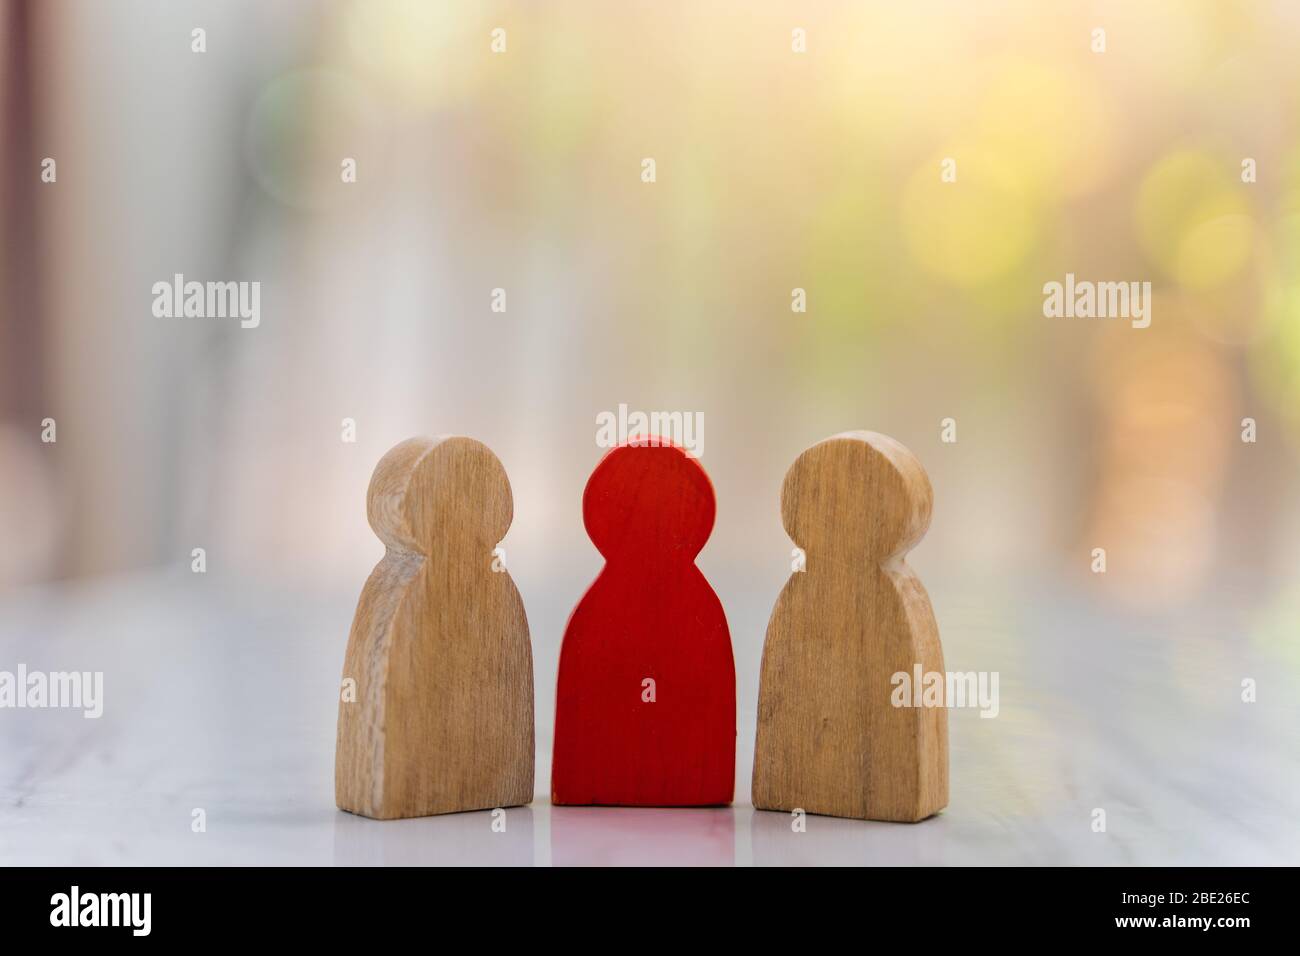 Figure in human resource management concept. The group of wooden puppets A red wooden figure like an dominant in a group with blur bokeh background Stock Photo